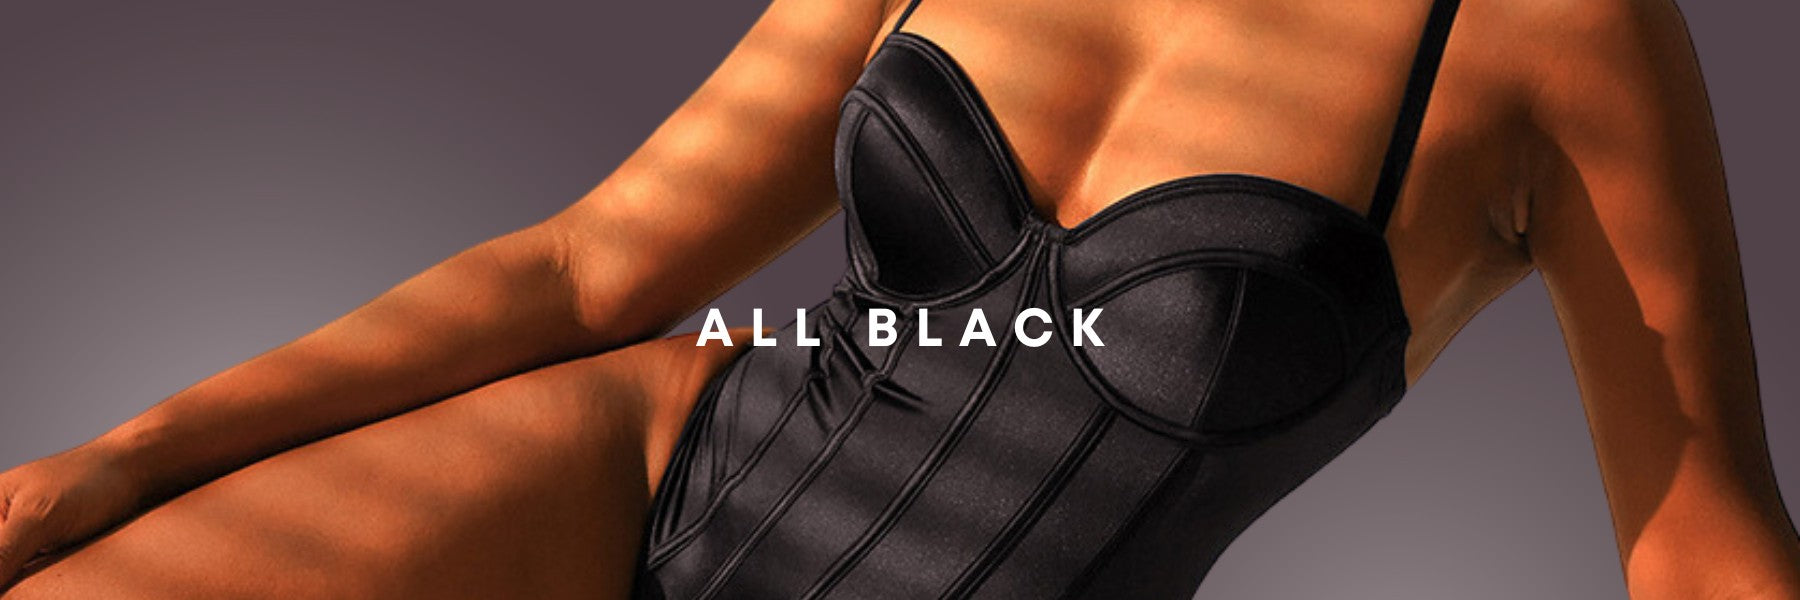 All Black - Your Shaping Wardrobe Essentials – Contour Clothing